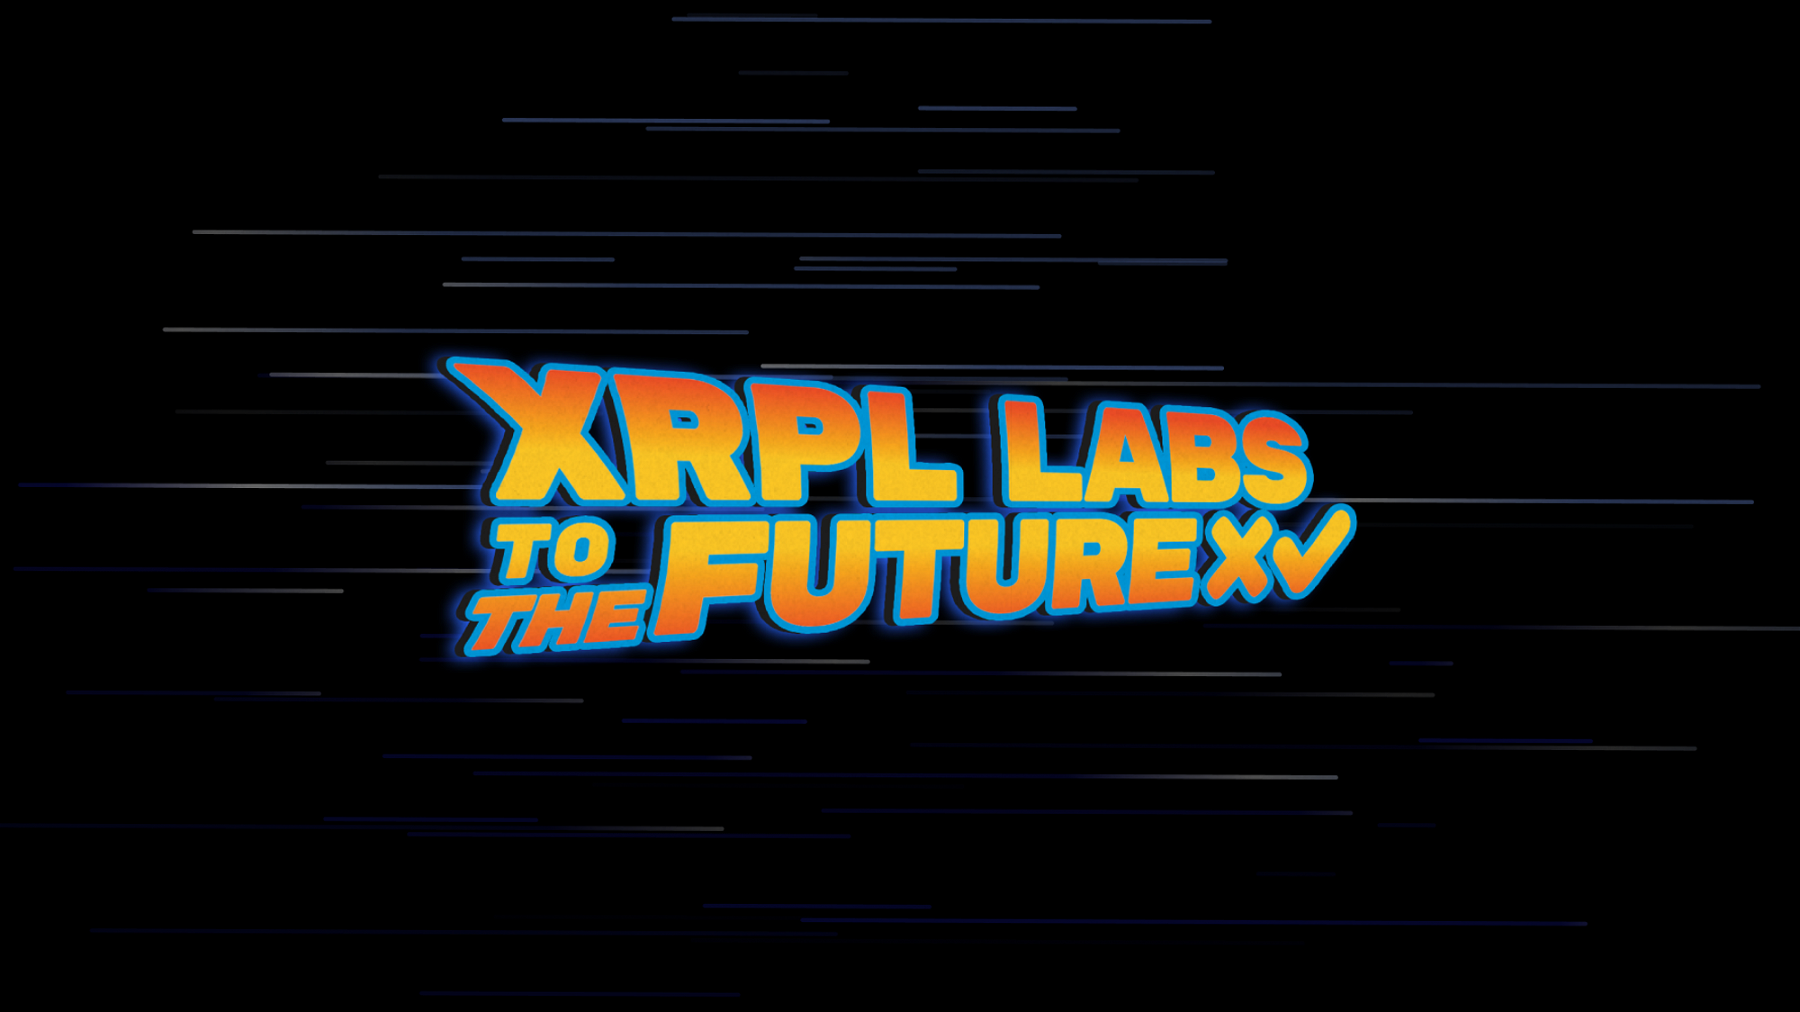 Charting the Future of XRPL Labs: a New Era of Payments